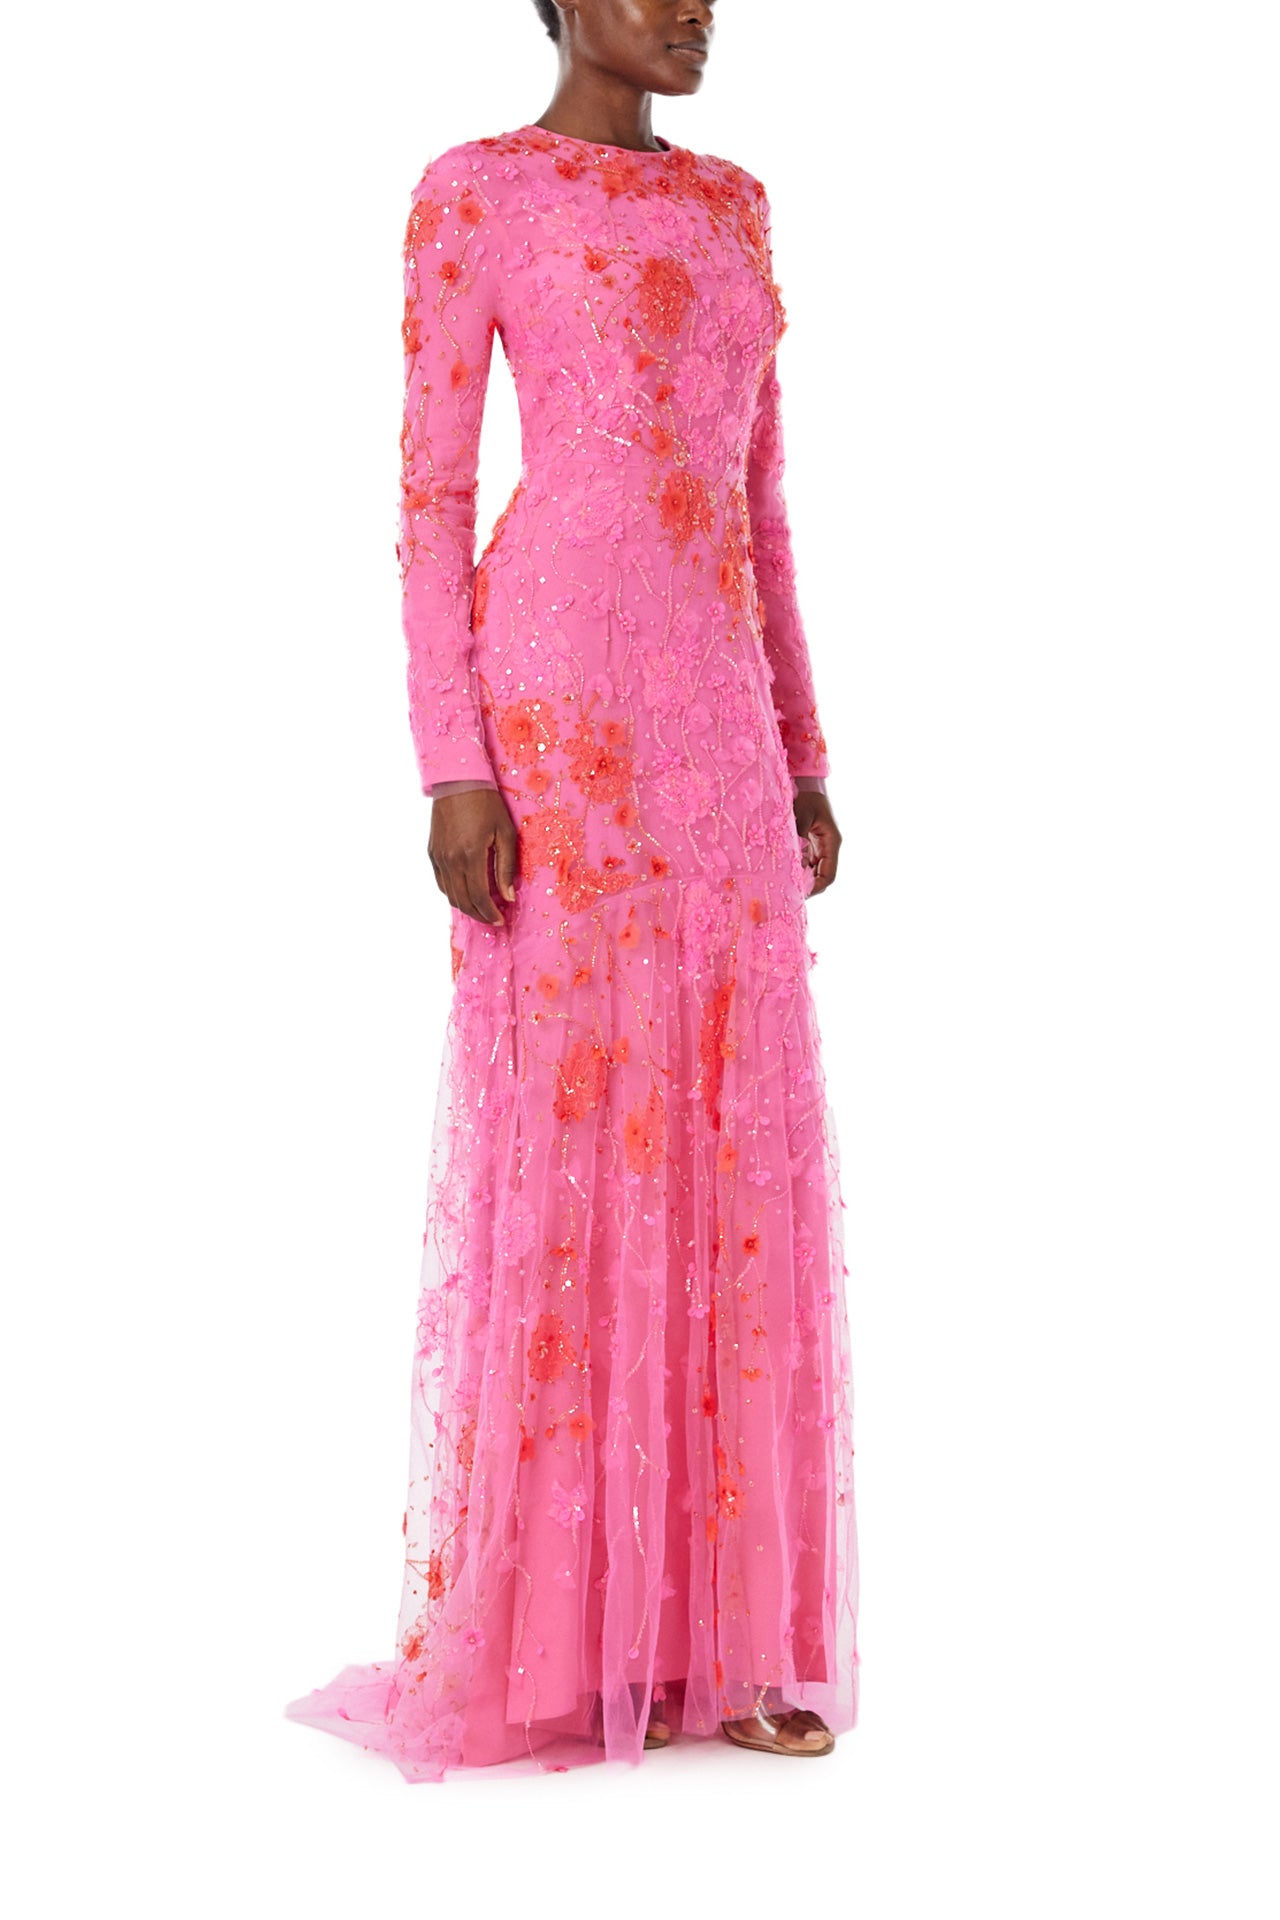 Monique Lhuillier Spring 2024 long sleeve gown in raspberry red embroidery - right side.